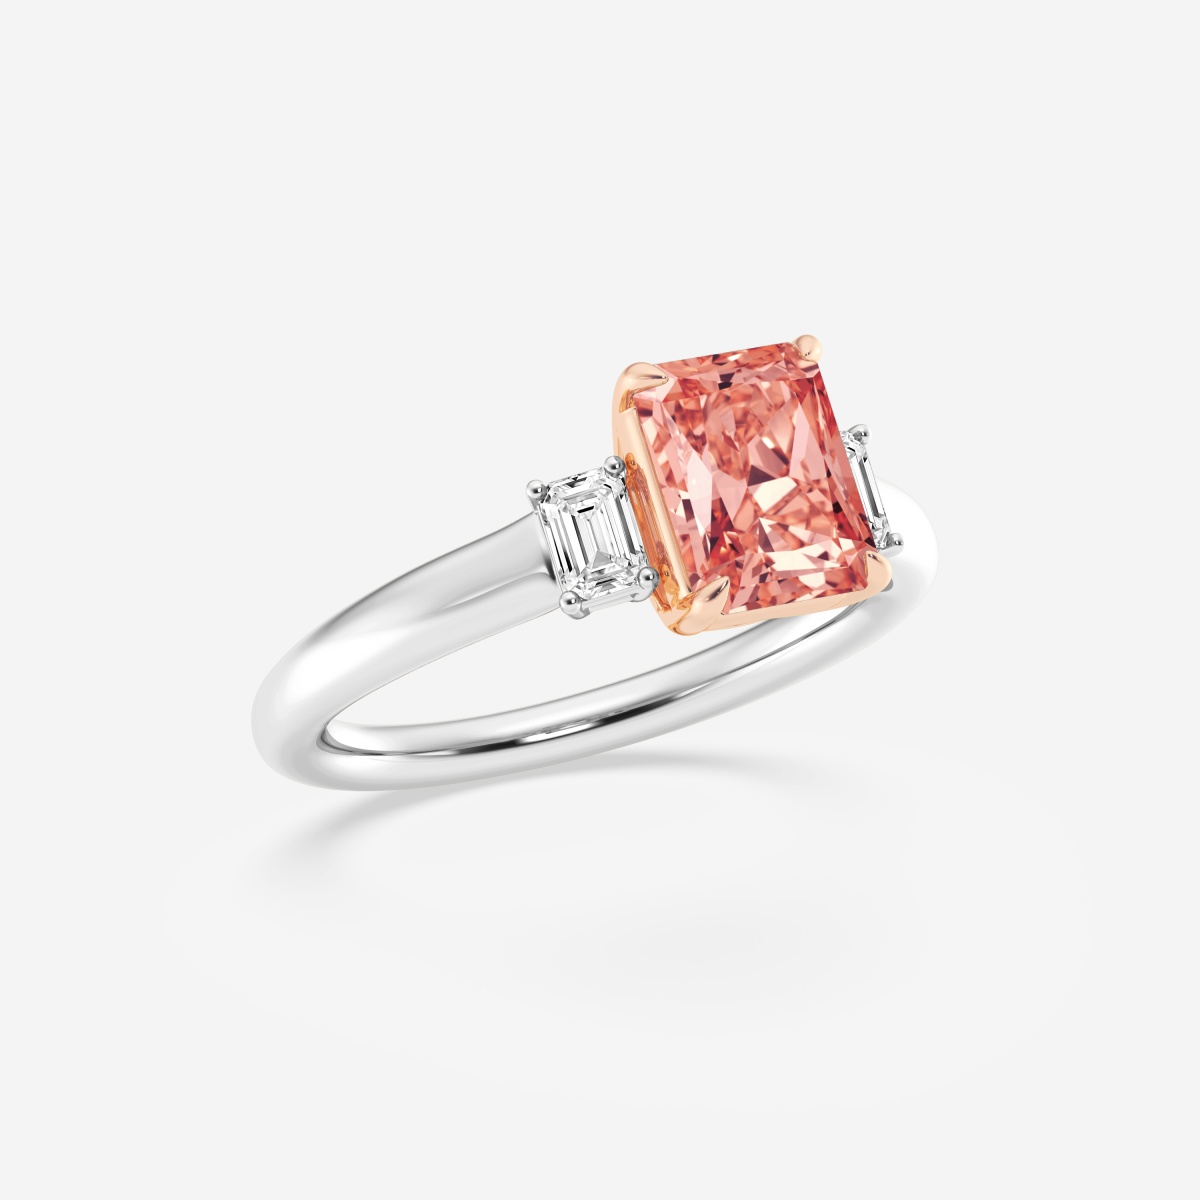 Additional Image 1 for  1 7/8 ctw Radiant Lab Grown Diamond Fancy Pink With Side Emerald Cuts Three-Stone Engagement Ring